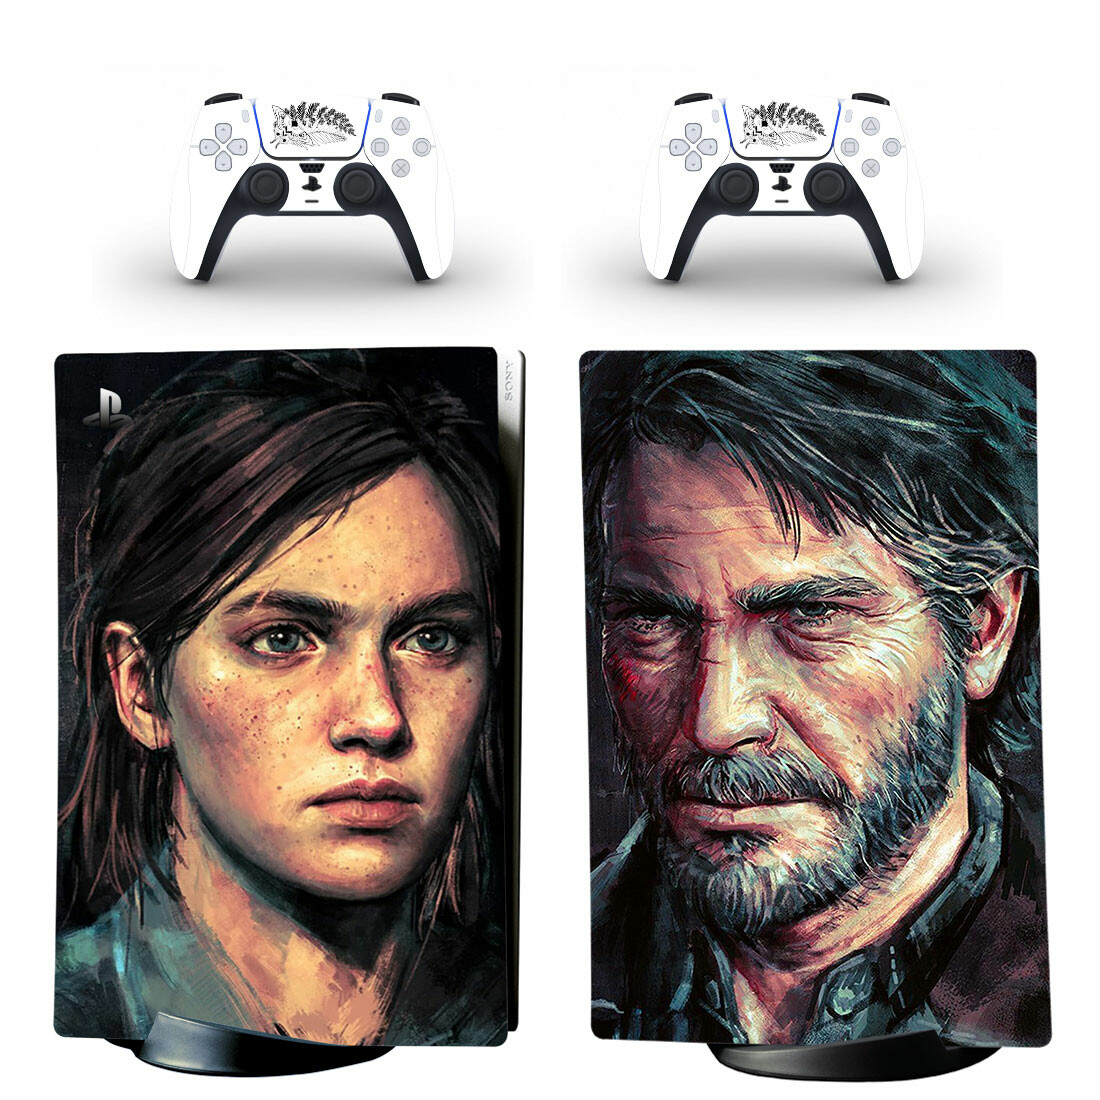 The Last Of Us II Skin Sticker Decal For PS5 Digital Edition And Controllers